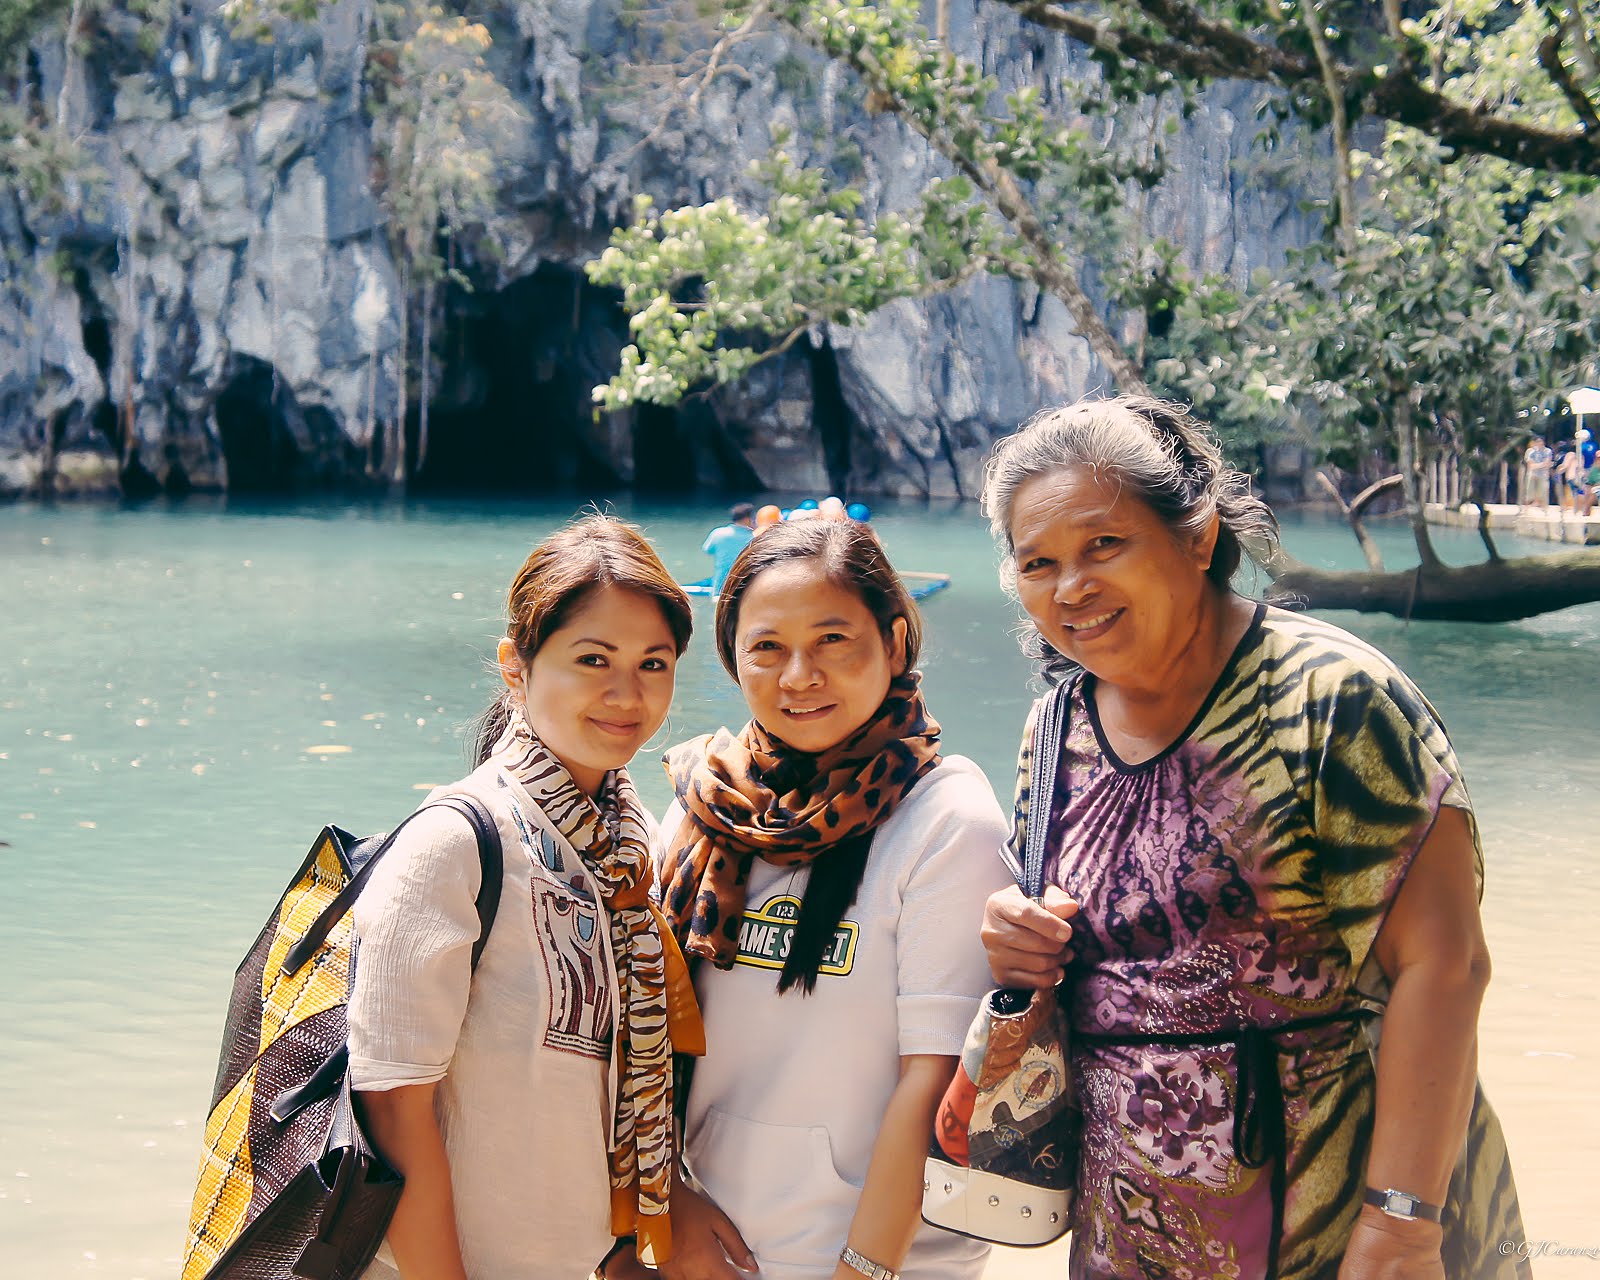 Palawan Underground River Tour: Things To Do in Palawan, Philippines